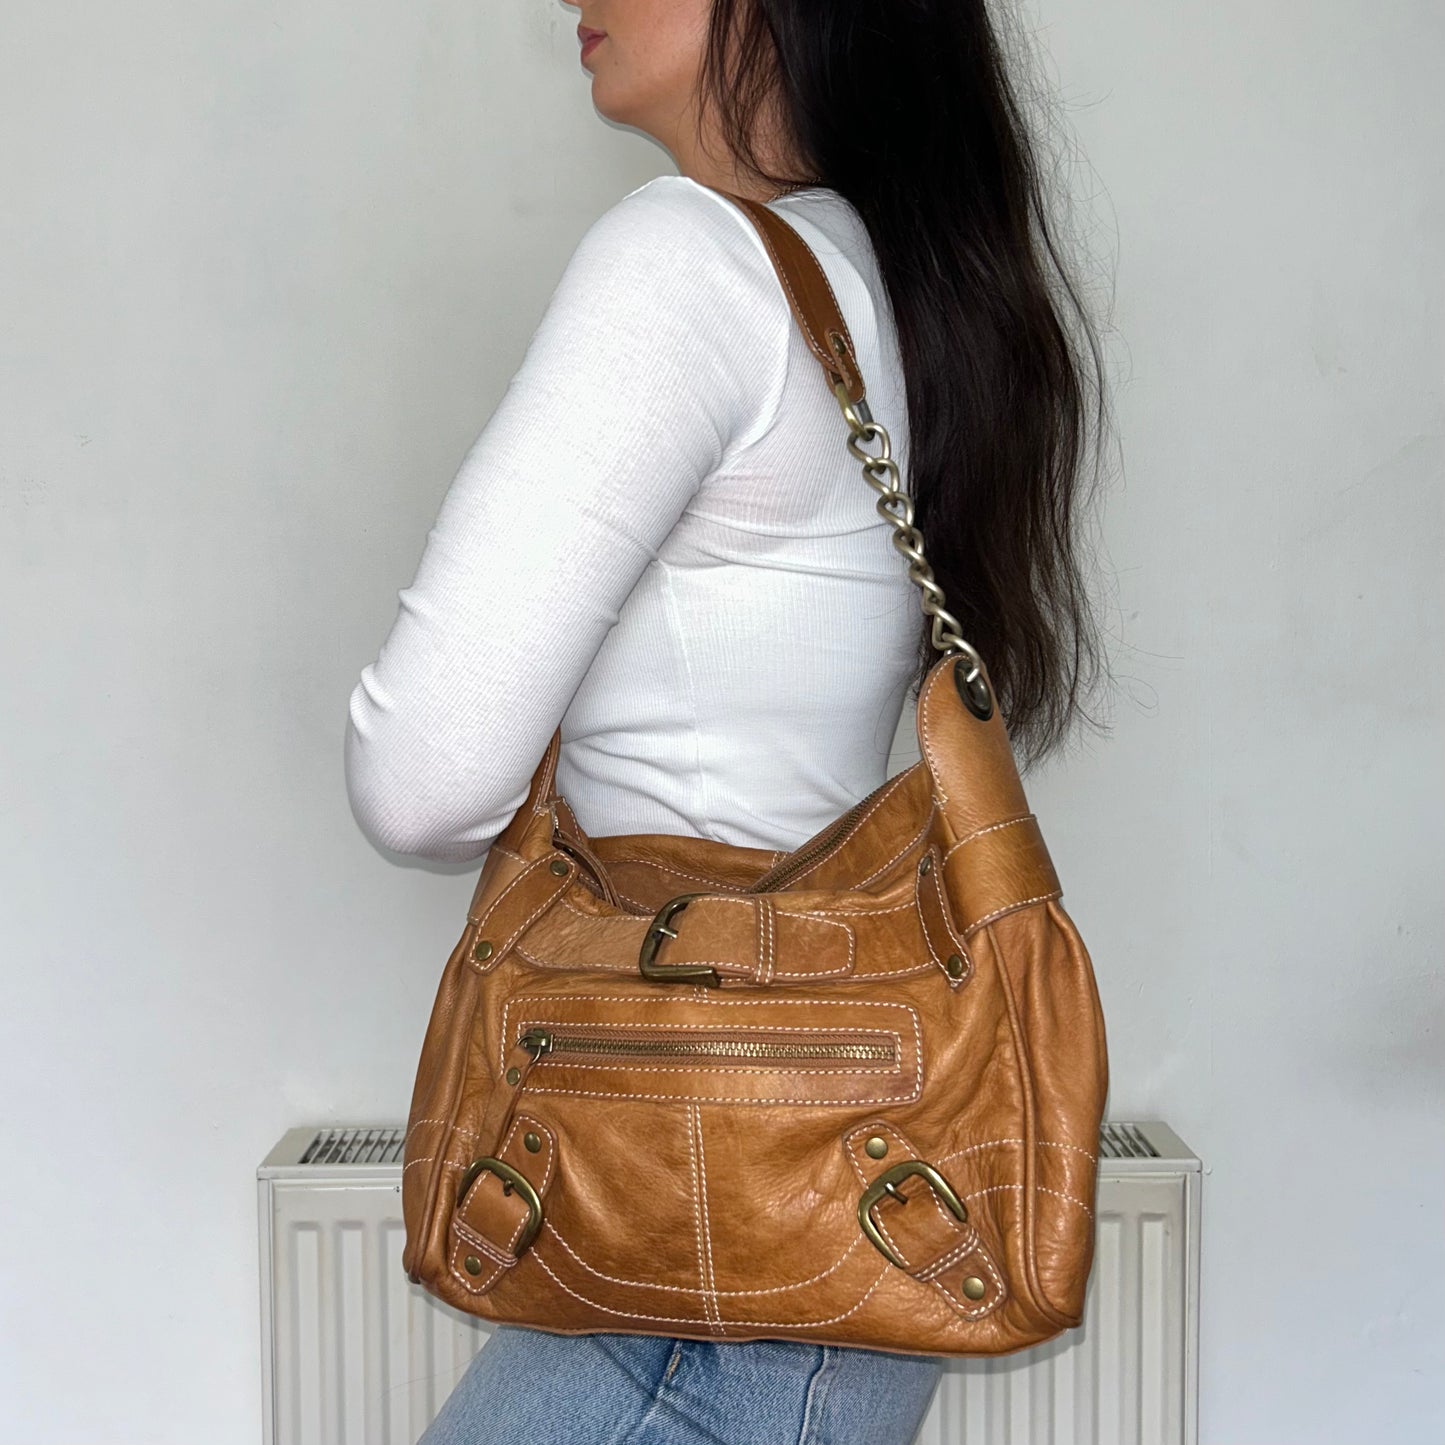 tan brown leather shoulder bag shown on a models shoulder wearing a white top and blue jeans